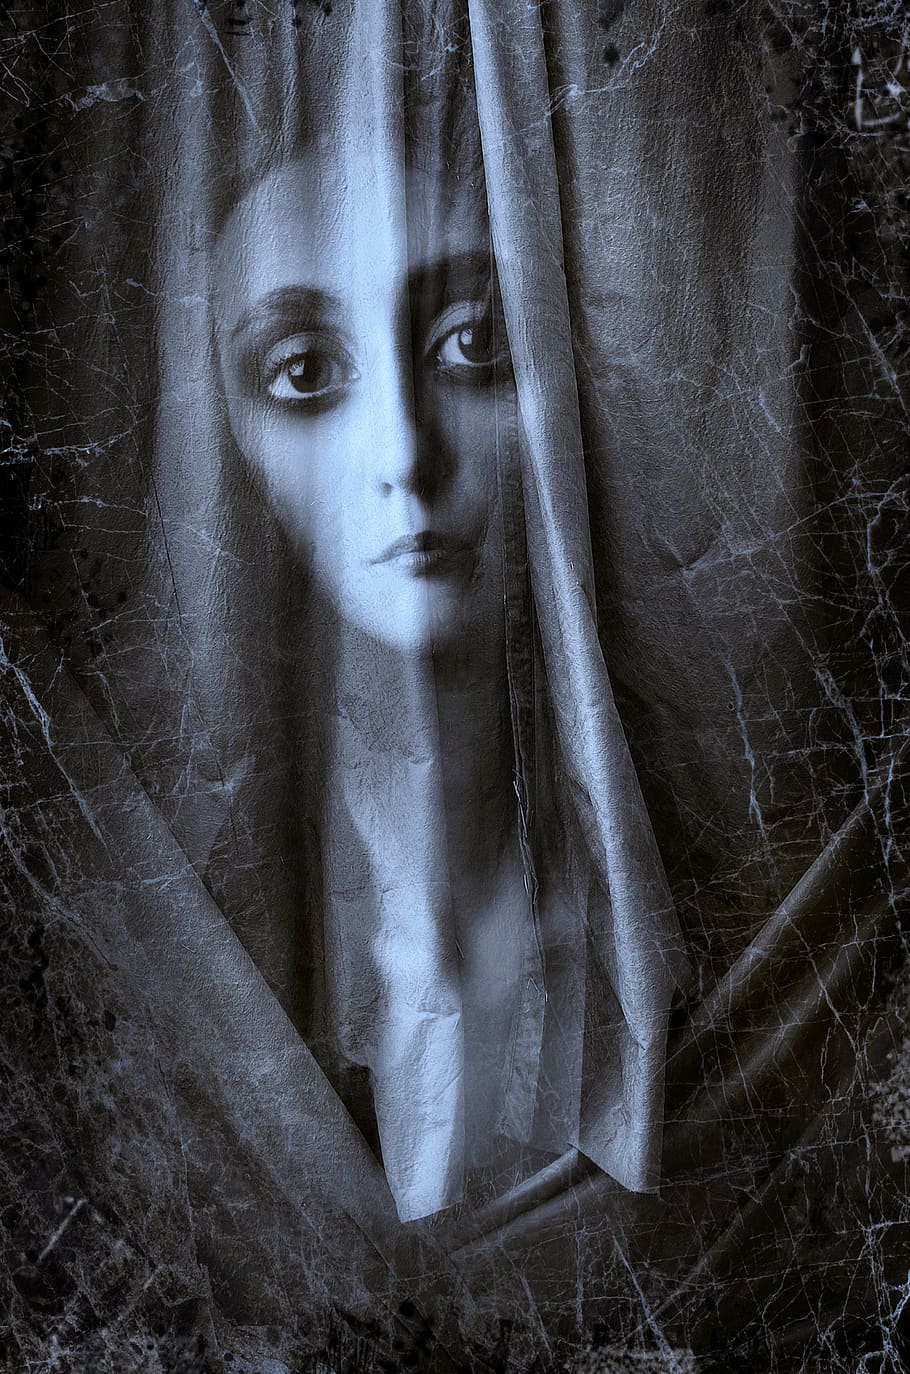 book cover, portrait, mourning, cloth, face, emotional, suffering, gloomy, light, mystical